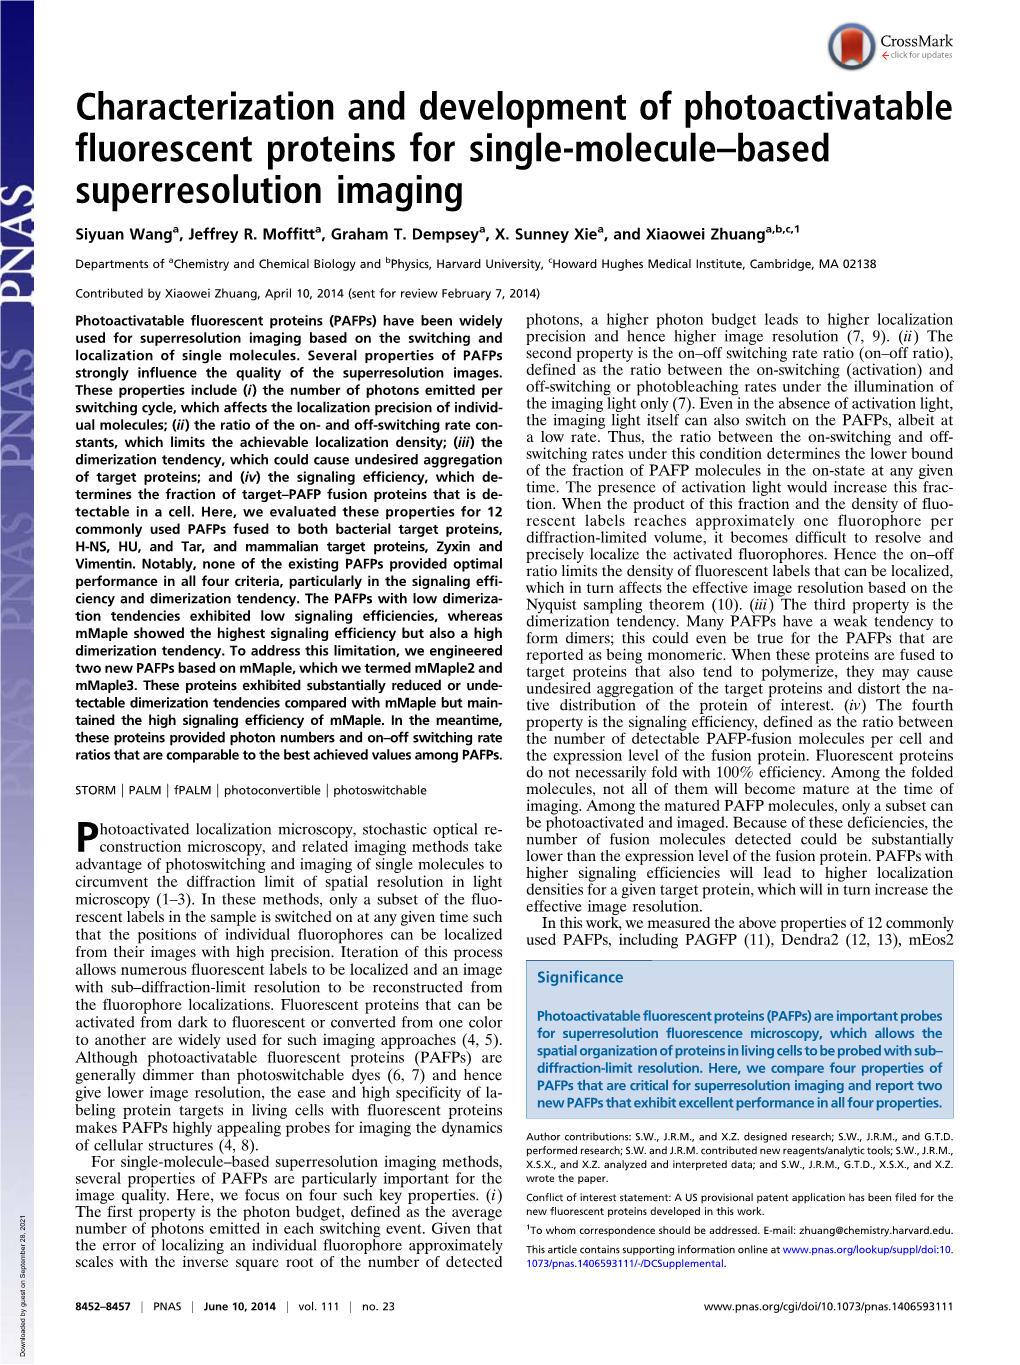 Characterization and Development of Photoactivatable Fluorescent Proteins for Single-Molecule–Based Superresolution Imaging